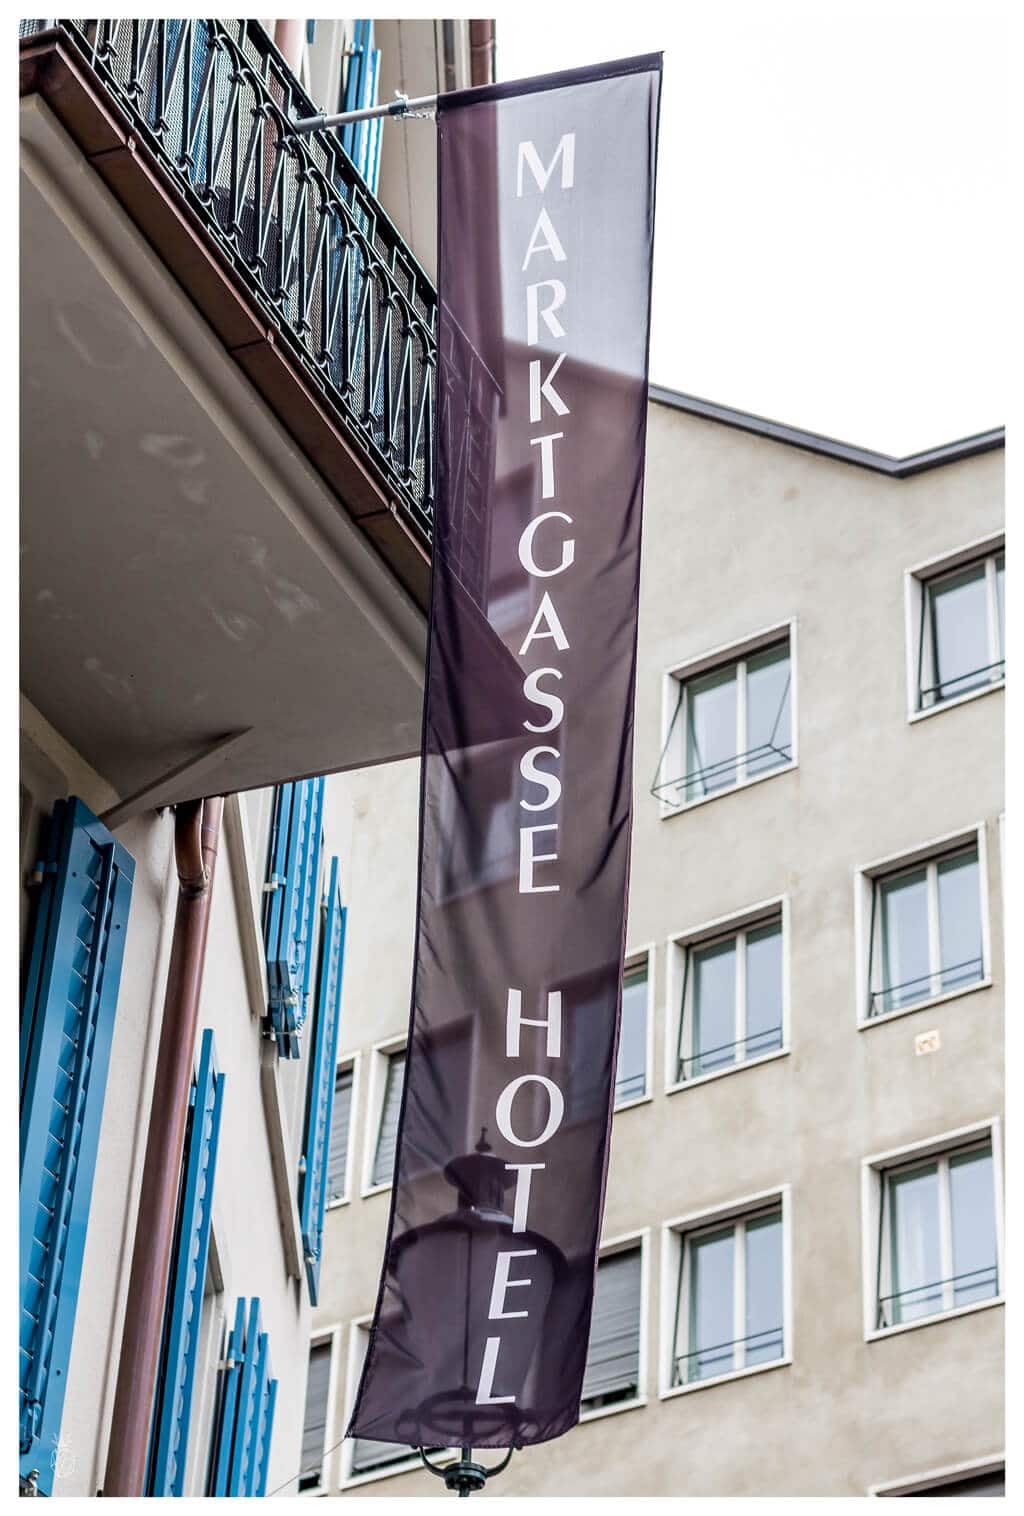 Travel Diaries : A Local Guide To Weekend in Zurich | Travel destinations MARKTGASSE HOTEL